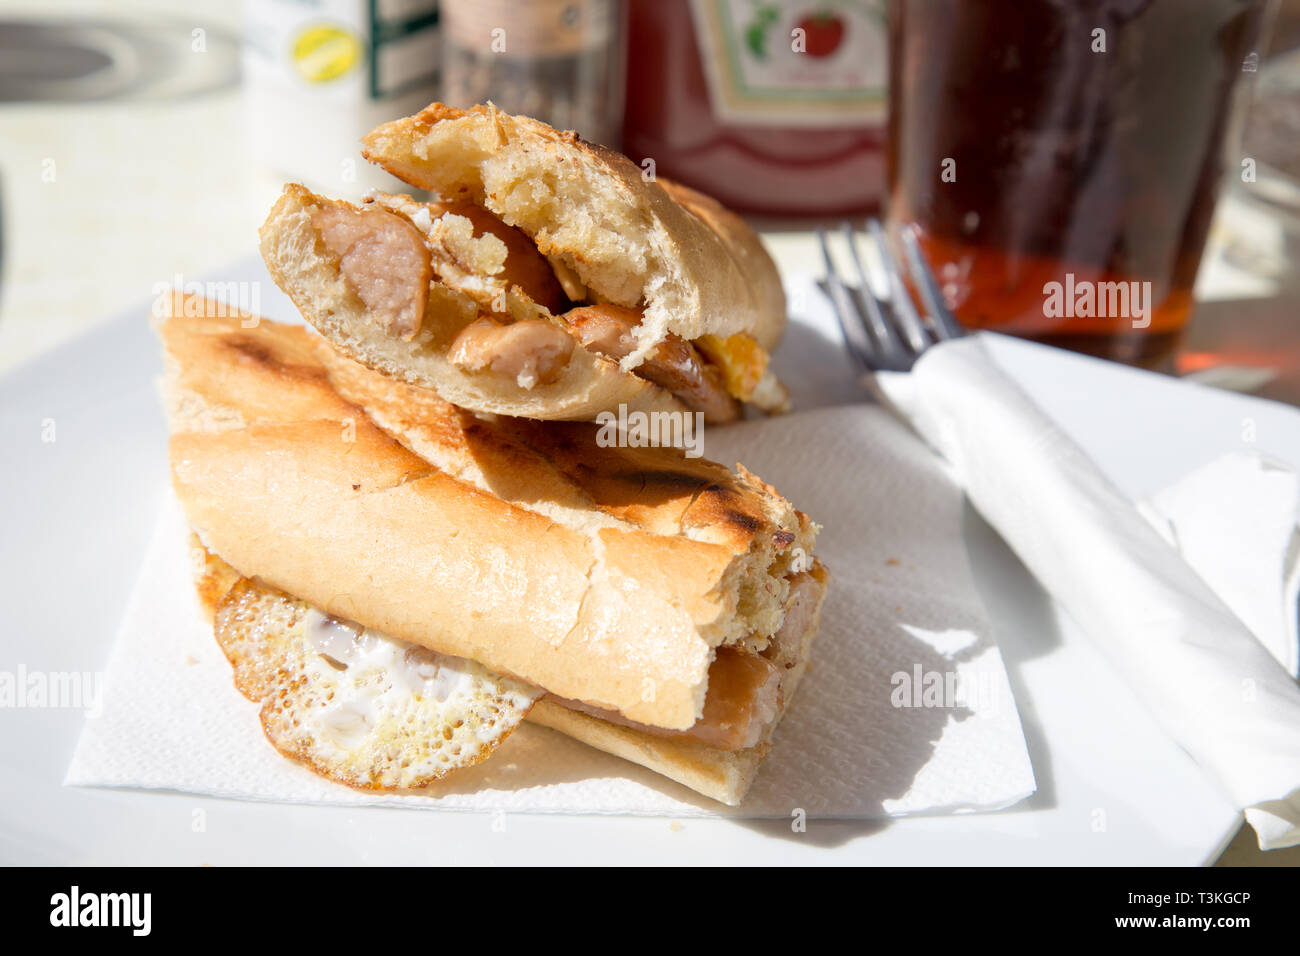 Breakfast snack of fried egg and sausage baguette served in a Tapas bar/cafe in Fuengirola, Spain. Stock Photo